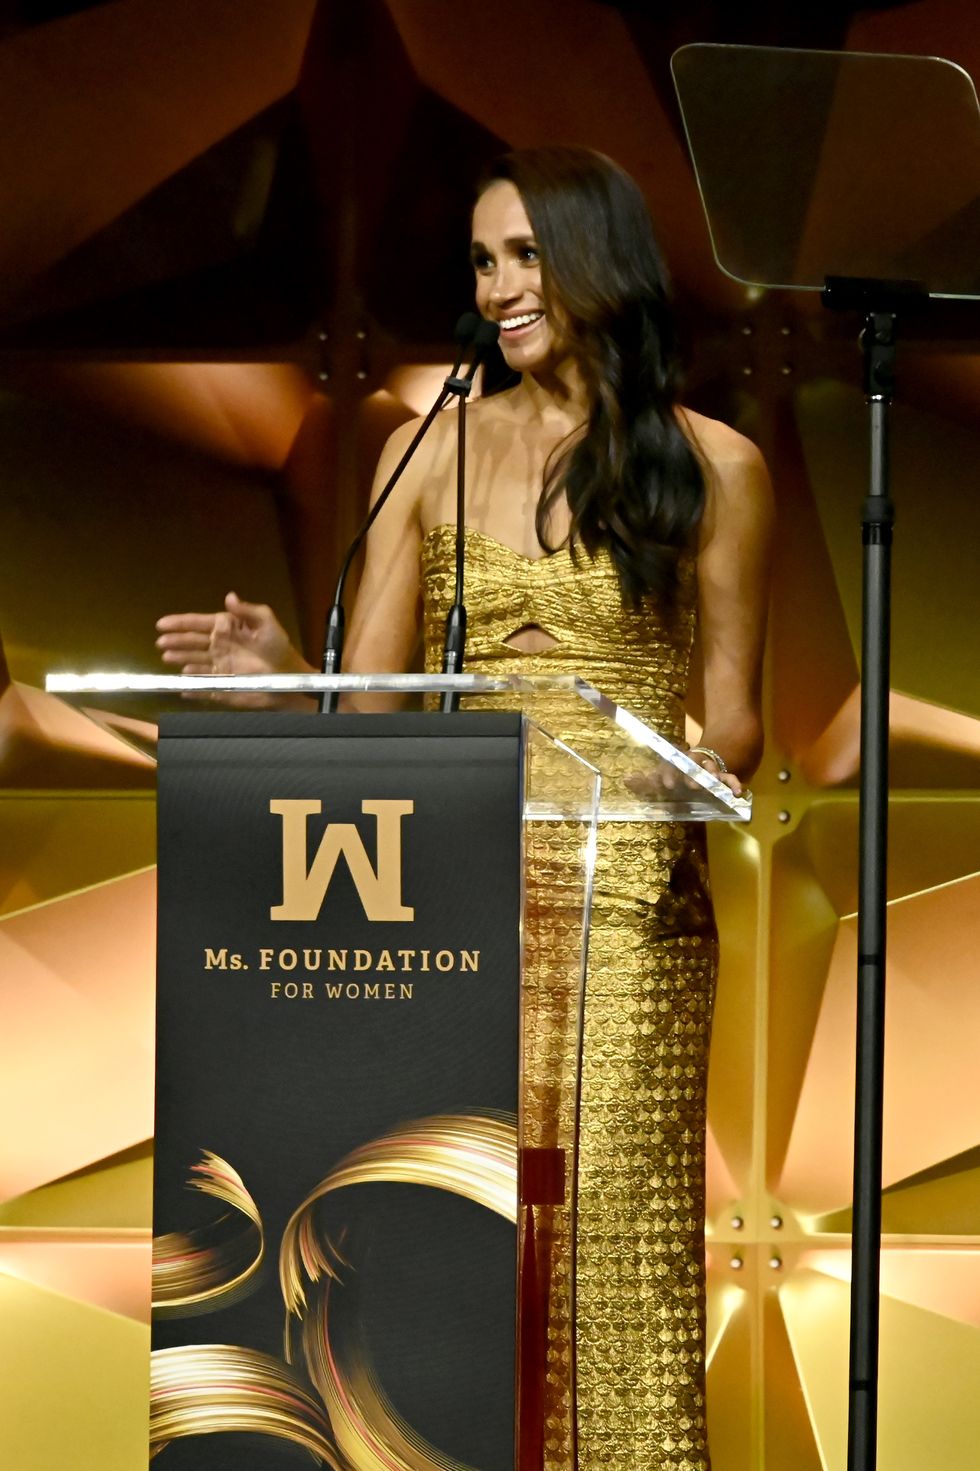 Meghan Markle Wore a Stunning Gold Front Slit Dress at Ms Foundation Awards